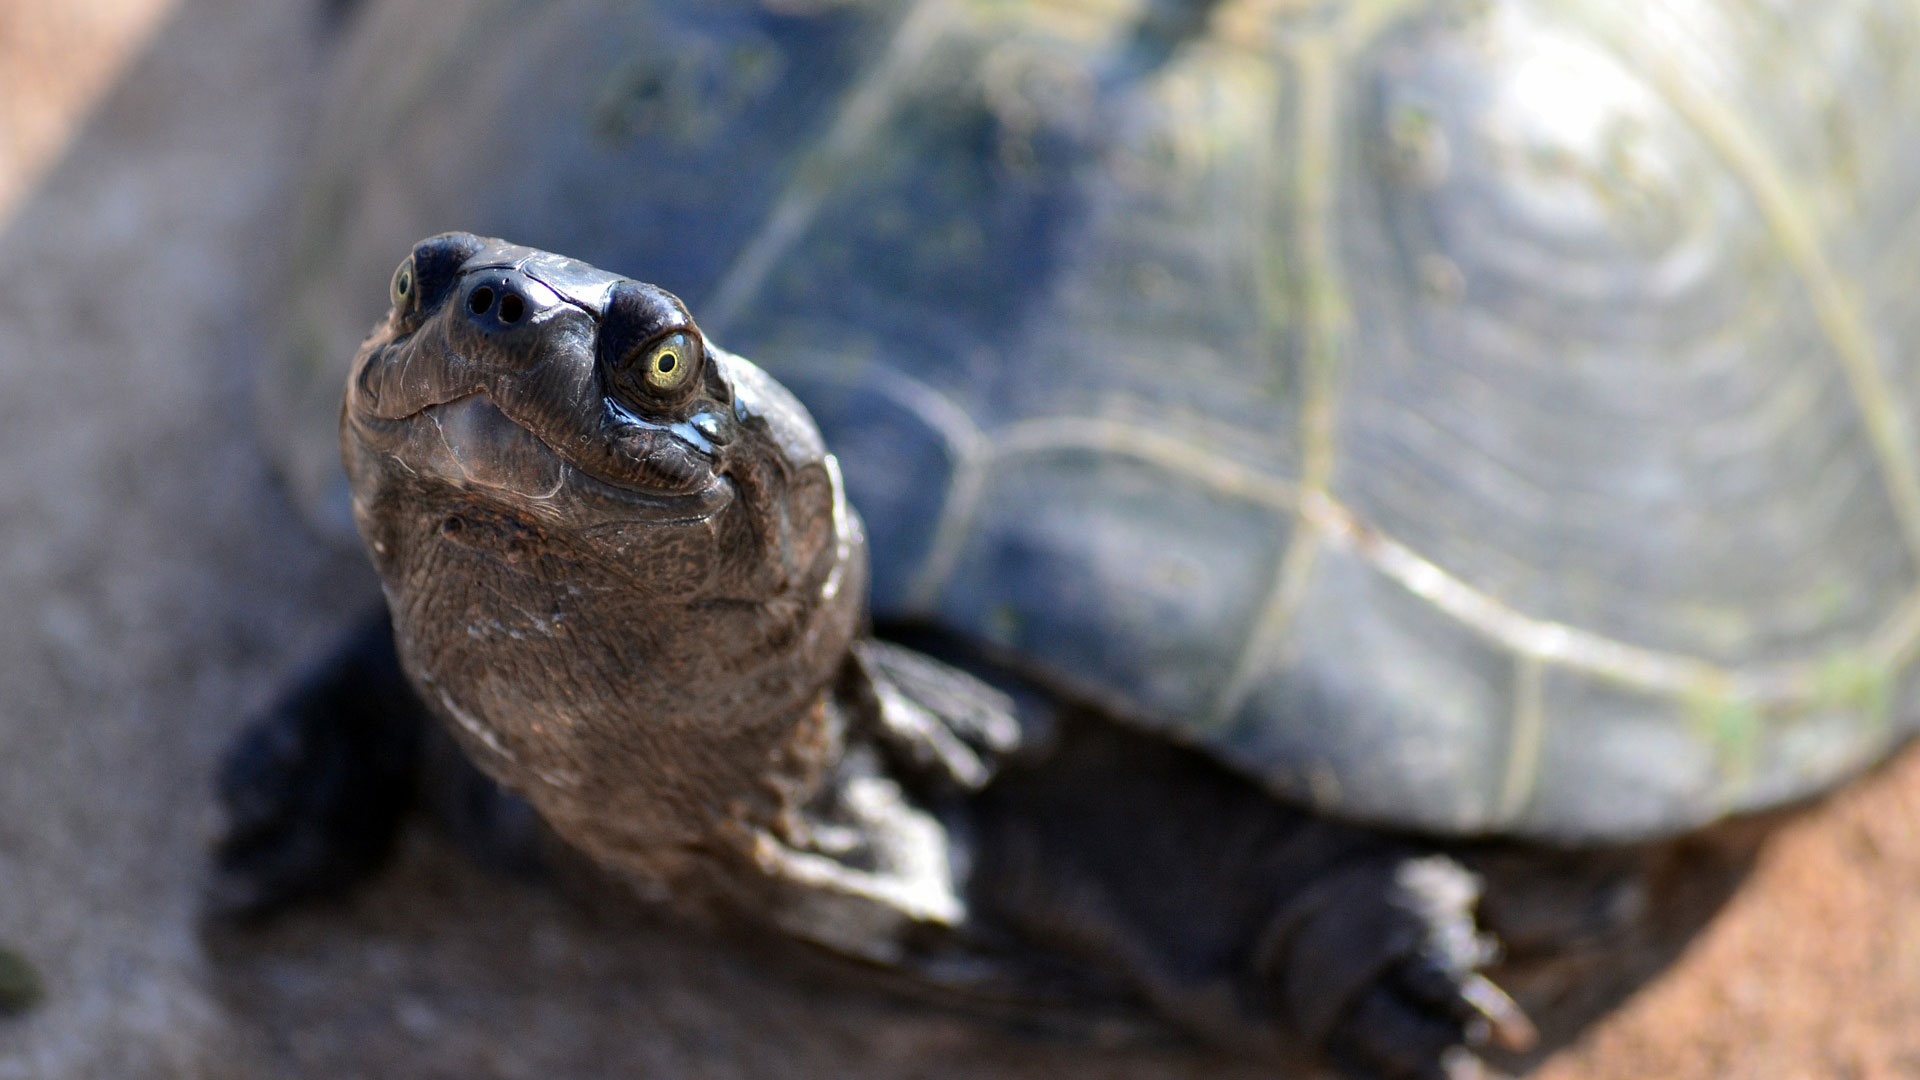 The Reptiles: Turtles and Tortoises | About | Nature | PBS